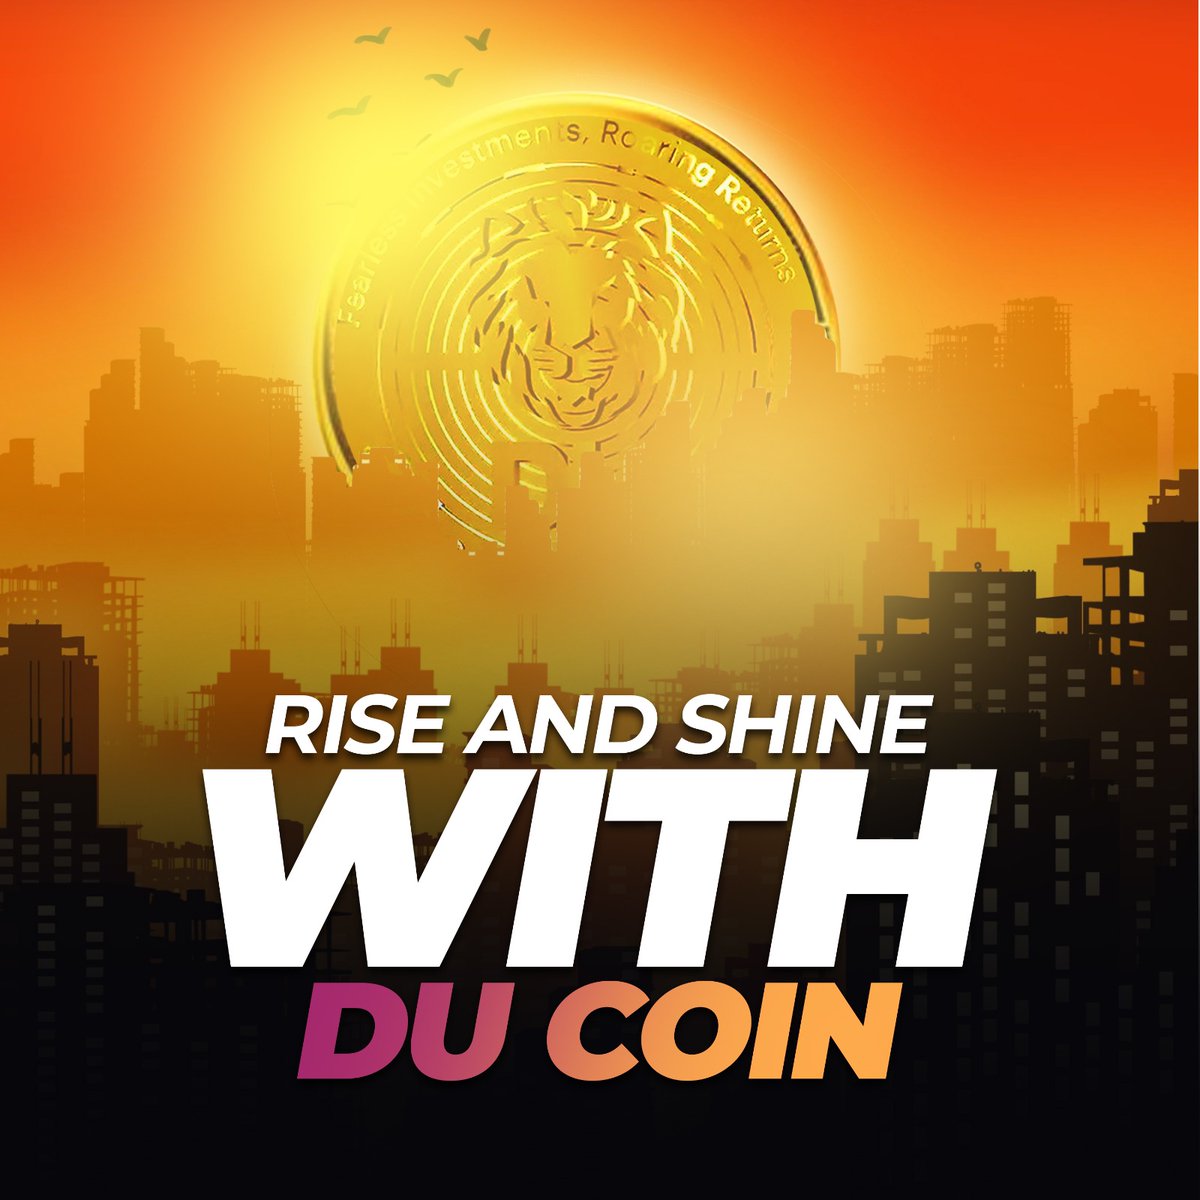 'Rise and shine with Du Coin! Start your day with a chance to win big! Stake and earn with Du Coin

 #DuCoinDelights #StakeAndWin #DubaiDreams #DU_Solutions #ducoin #DuCoinCommunity #cyrptonews #CryptoCommunity #stakeearn #staketoelevate #StakeWithDU #stakingcommunity #invest